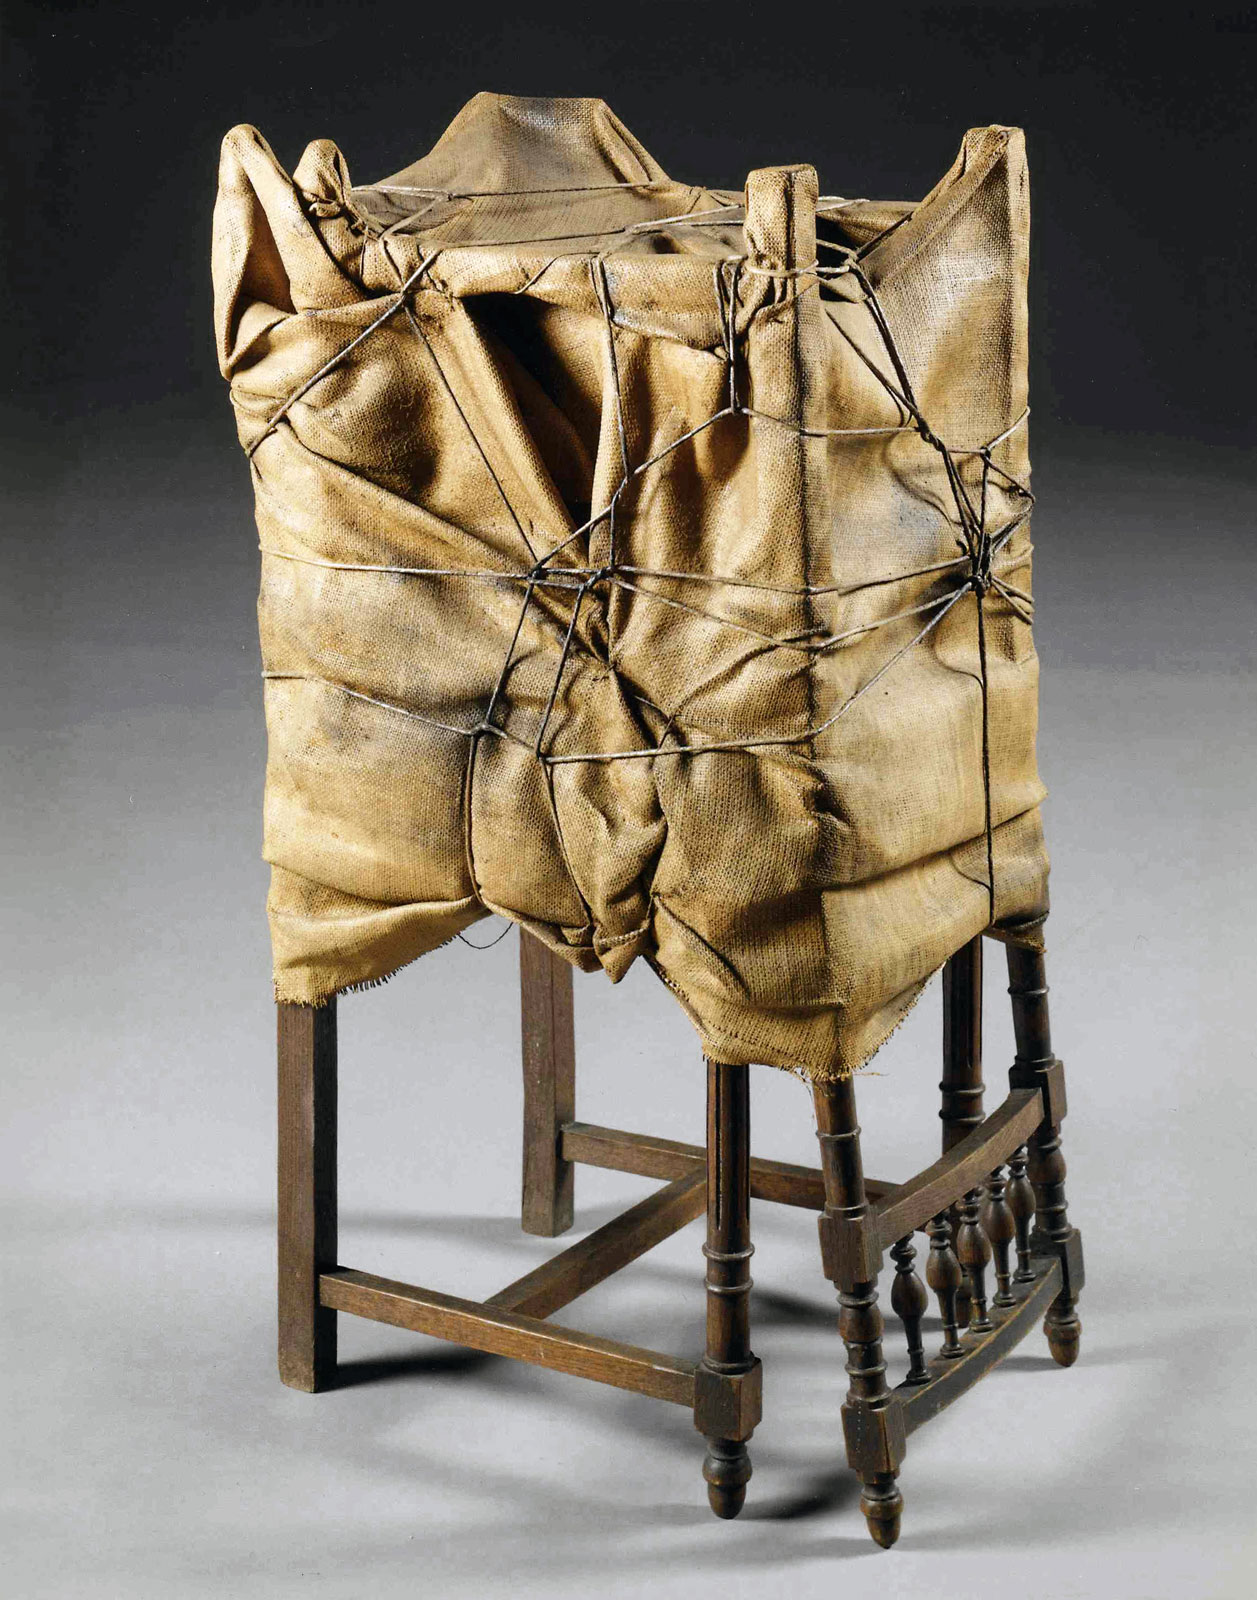 2008 Two Wrapped Chairs 1961 Copia